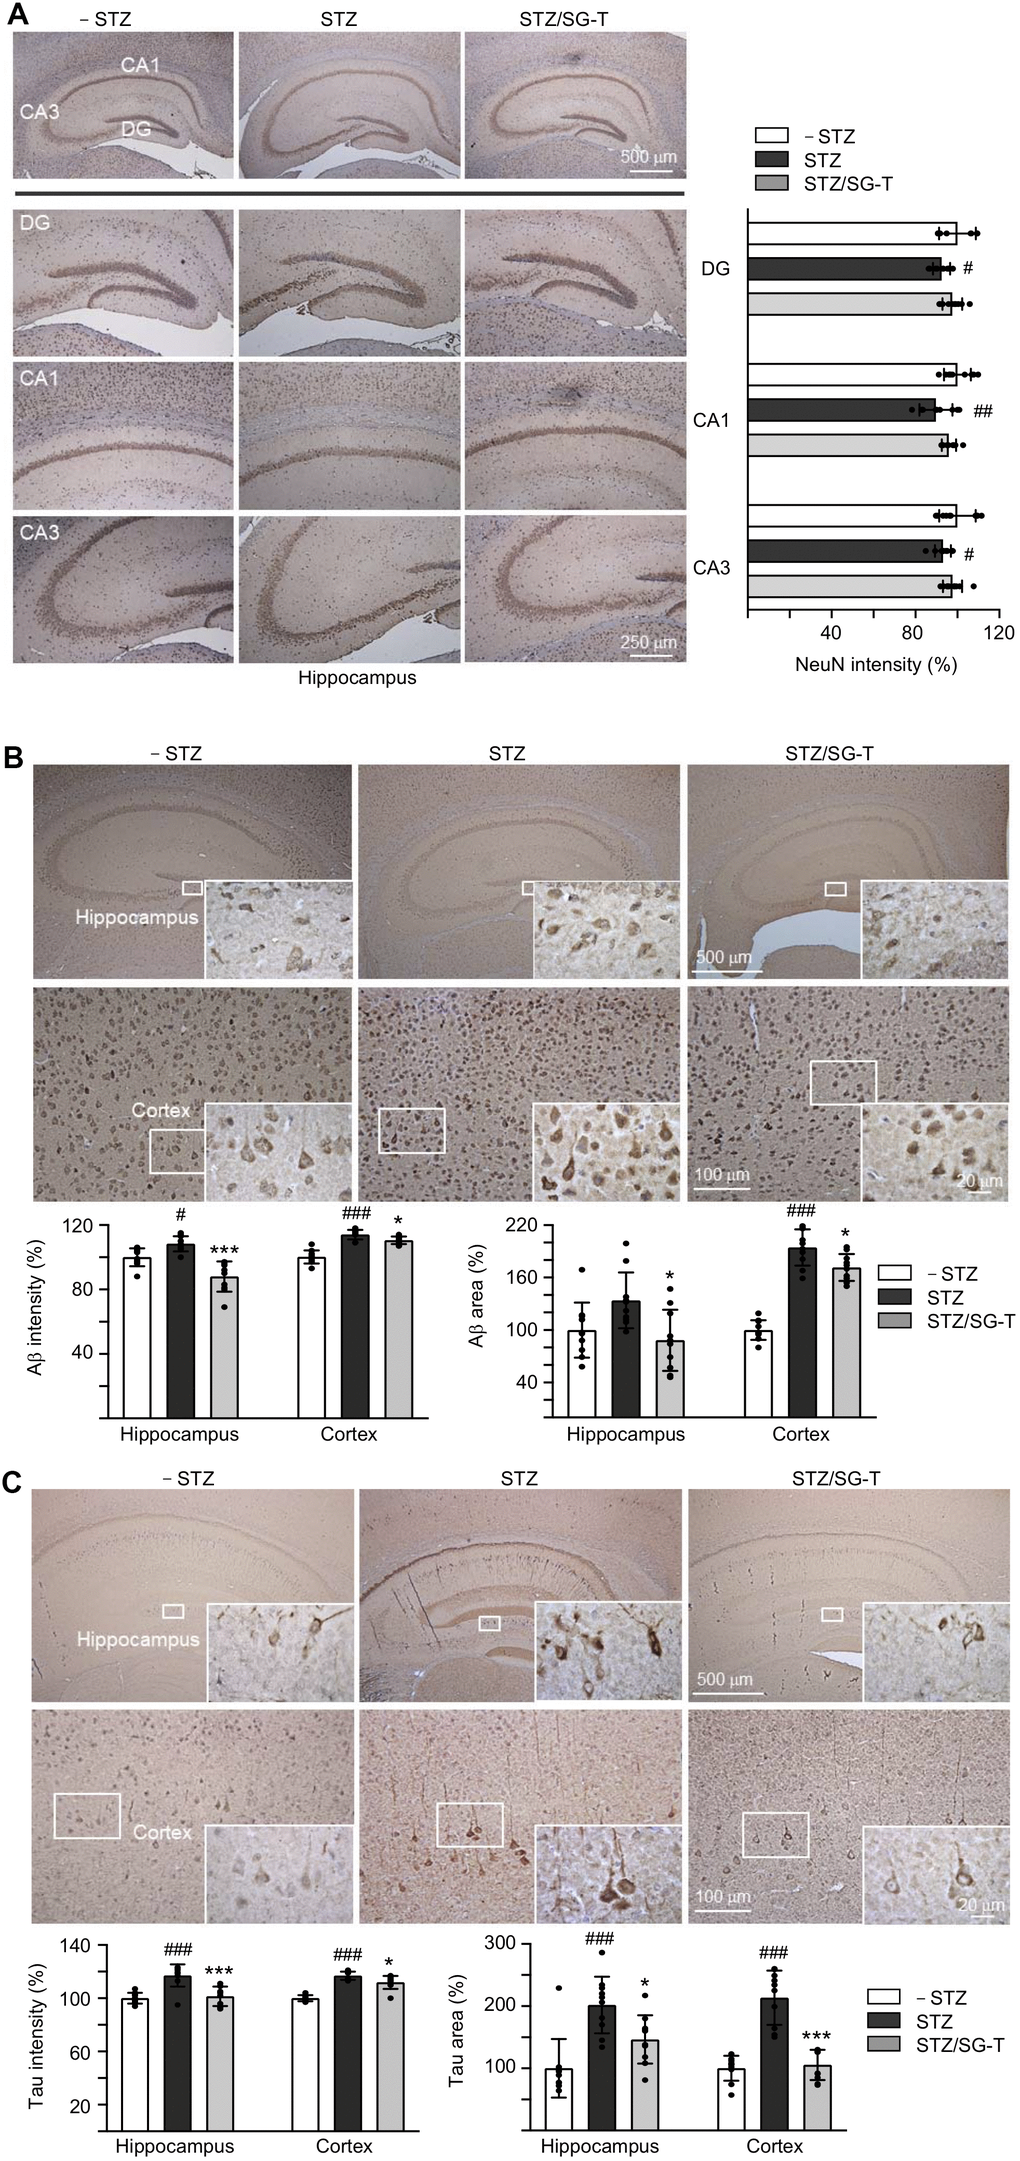 Reduction of Aβ and Tau immunoreactivity of SG-Tang in STZ-treated 3×Tg-AD mice. Mice in – STZ, STZ and STZ/SG-Tang groups received vehicle, STZ and STZ+SG-Tang, respectively during the course of the experiment. (A) Representative IHC images for NeuN and intensity quantification in the hippocampus of mice. DG, dentate gyrus; CA1 and CA3, Cornu Ammonis areas 1 and 3. (B, C) Representative IHC images for Aβ and Tau and intensity and area quantification in the hippocampus and cortex of mice. P values: comparisons between STZ vs. – STZ mice (#: P ##: P ###: P P P post hoc Tukey test).